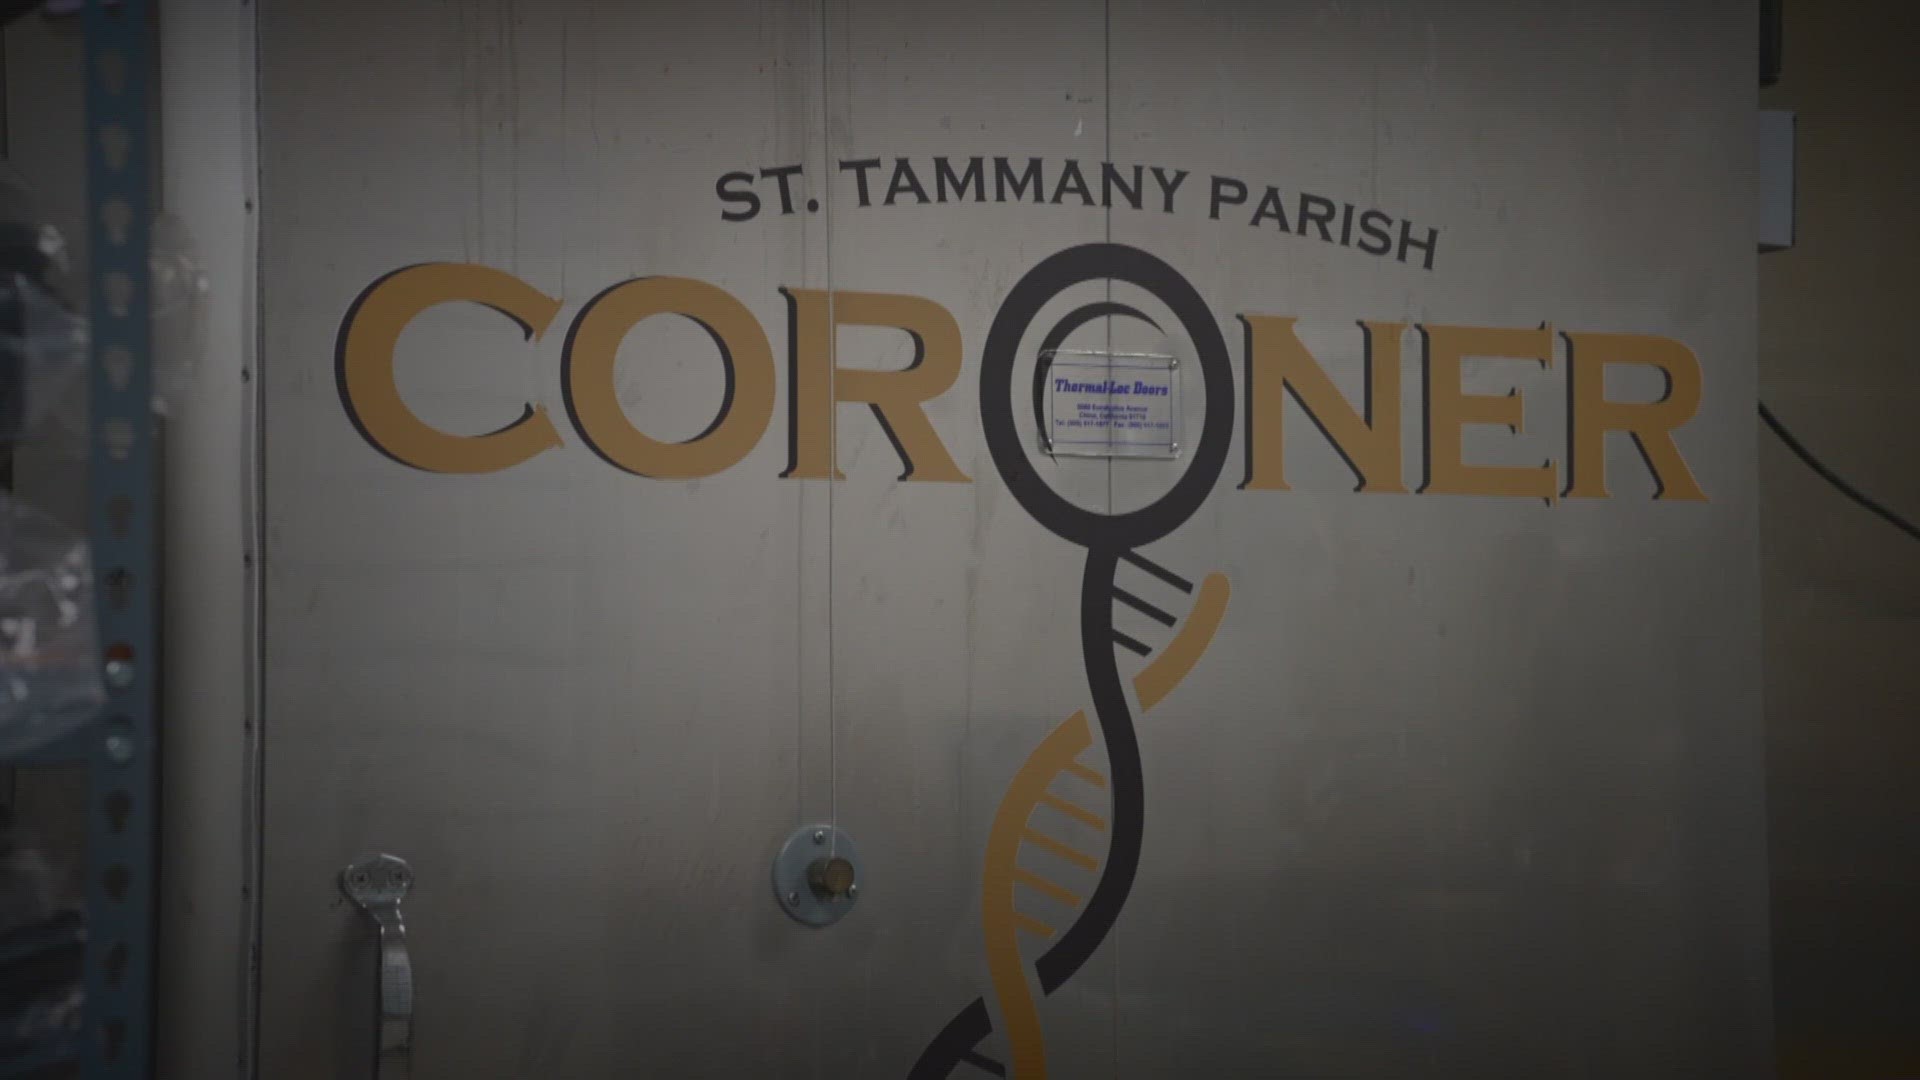 Tape's decision comes after five Northshore parishes announced lawsuits against the coroner in an attempt to stop the suspension.